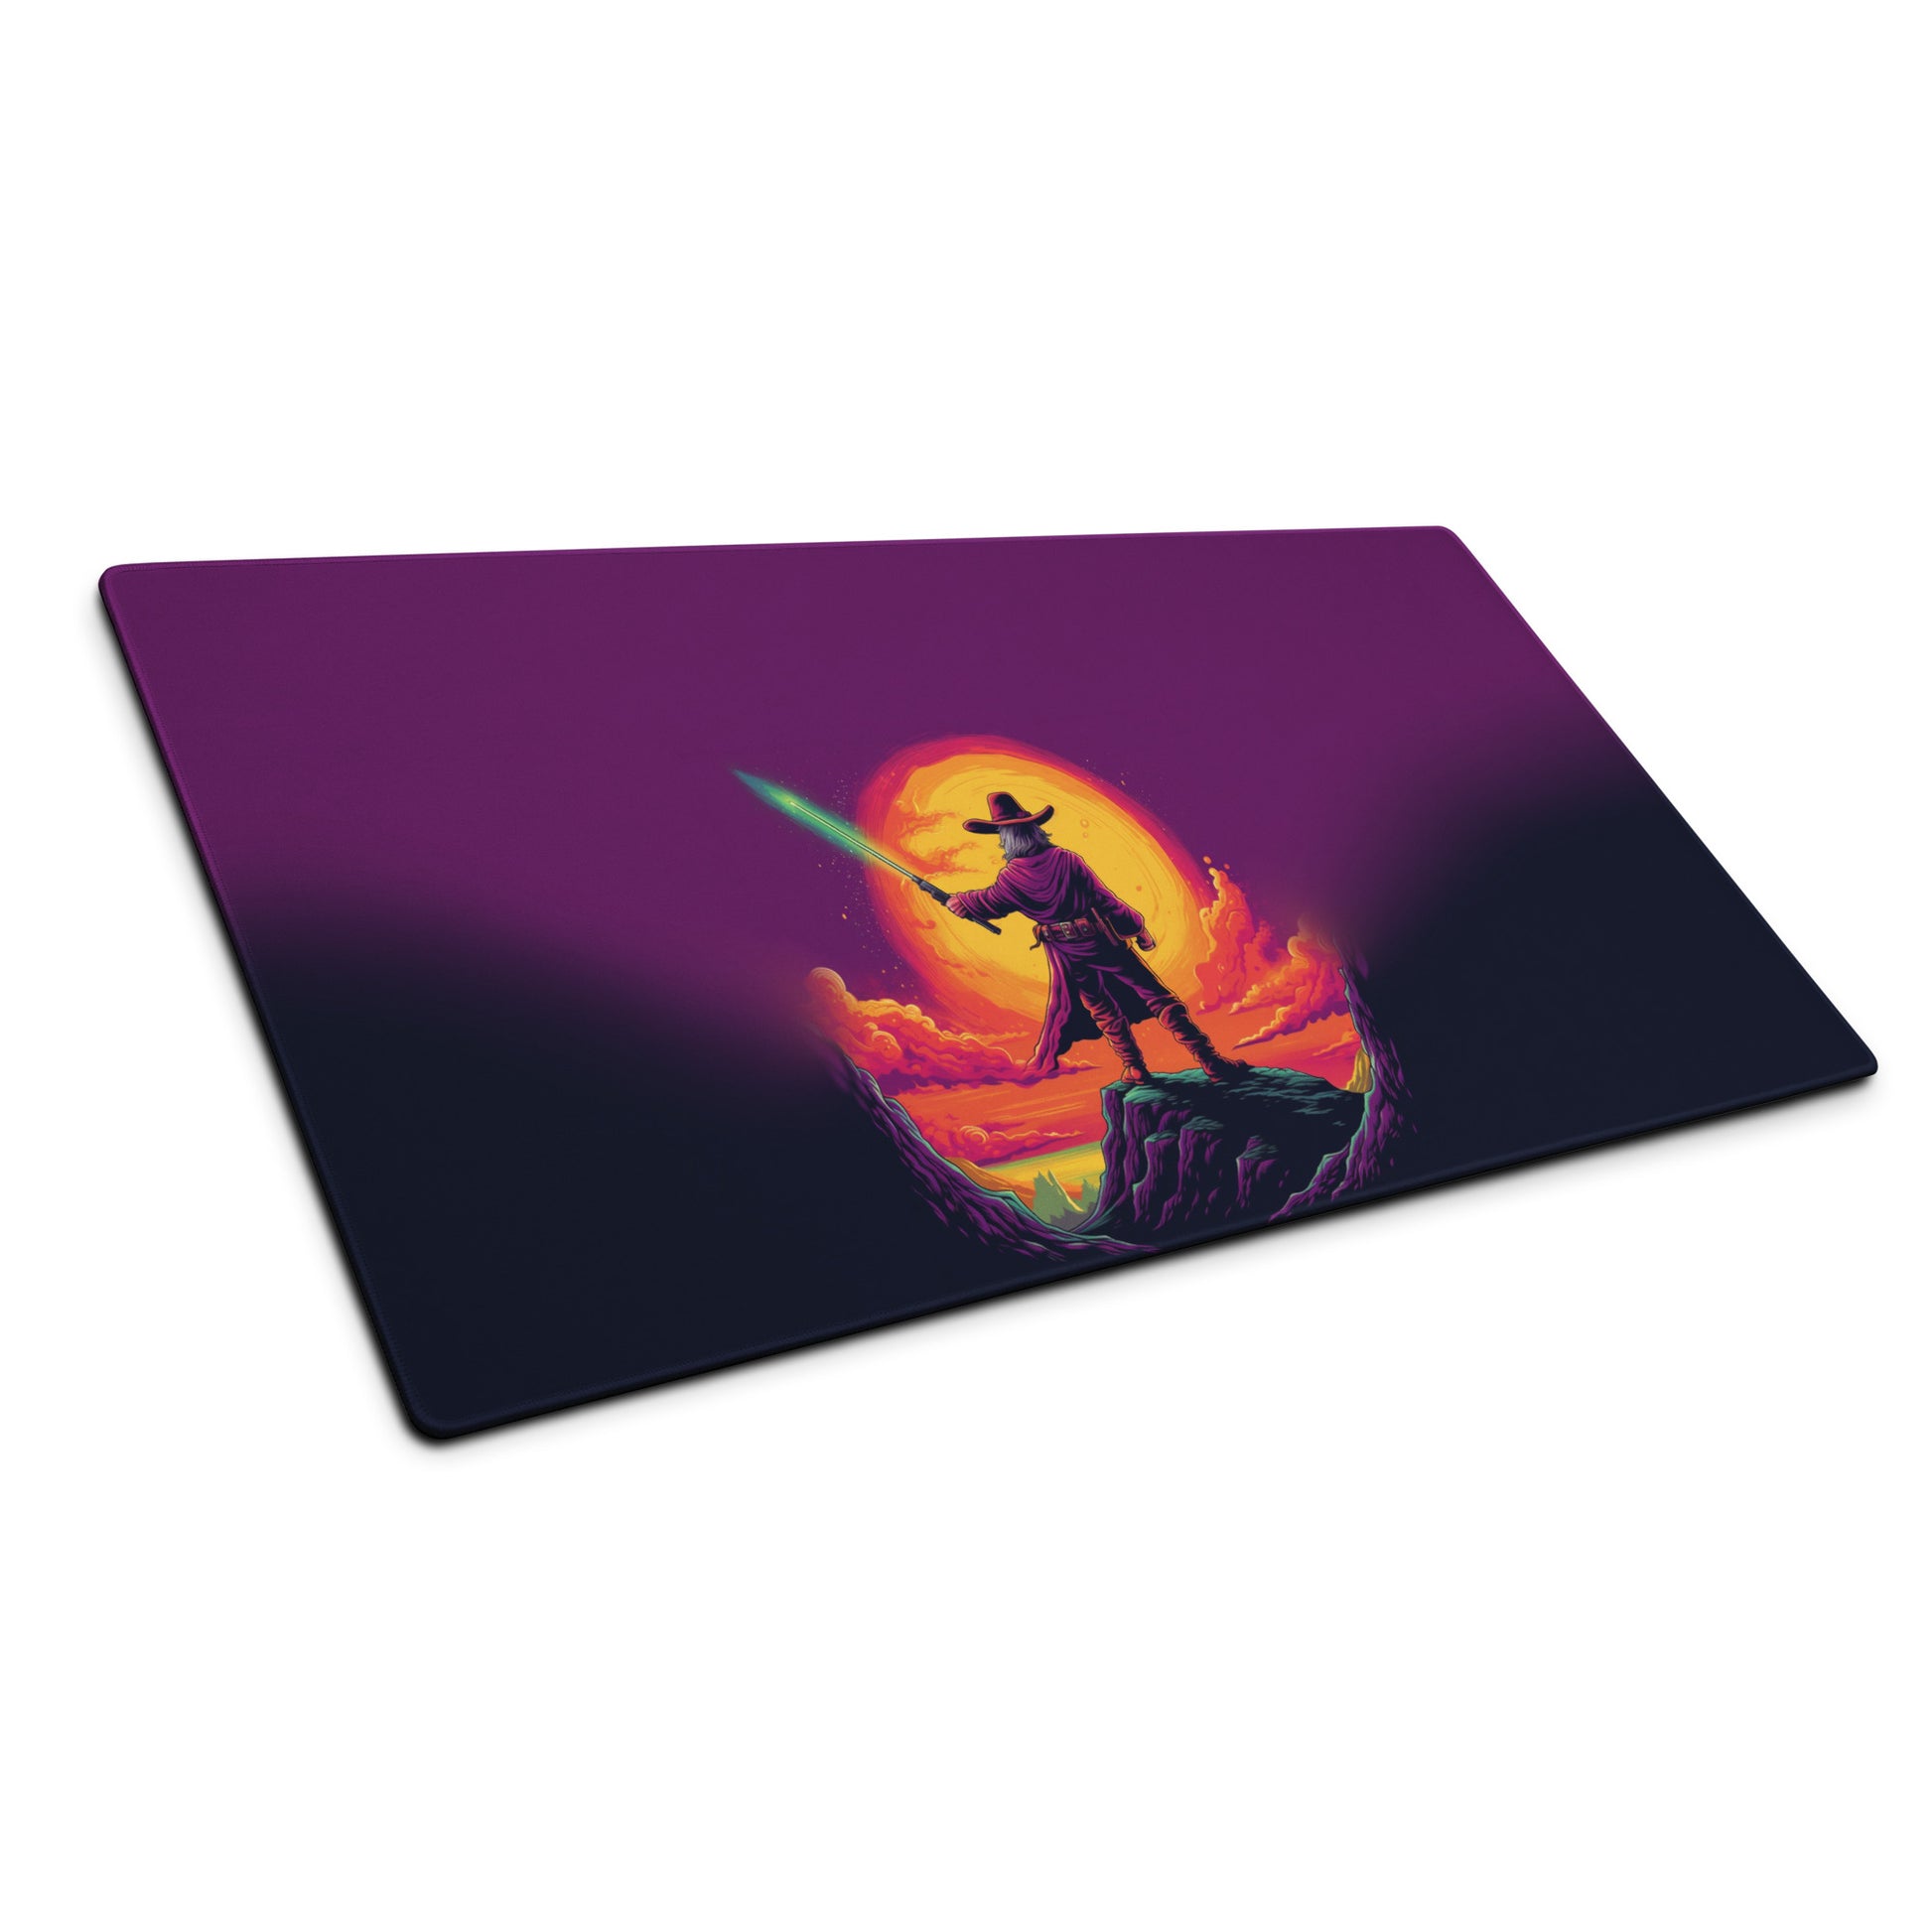 A 36" x 18" desk pad with a cowboy holding a glowing sword looking at the sunset sitting at an angle.